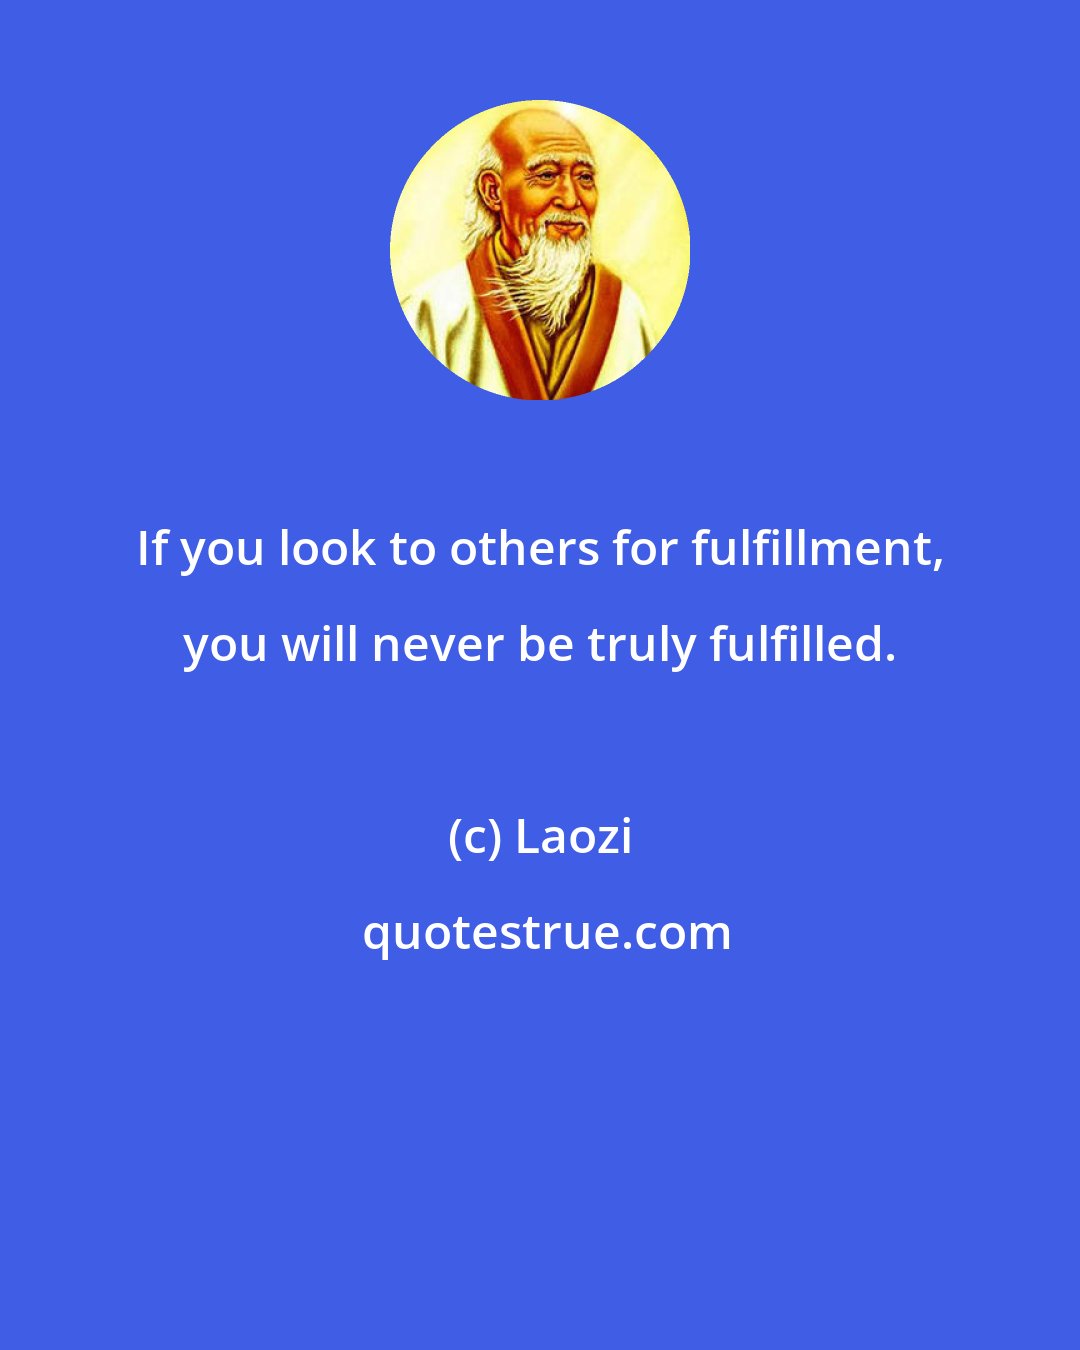 Laozi: If you look to others for fulfillment, you will never be truly fulfilled.